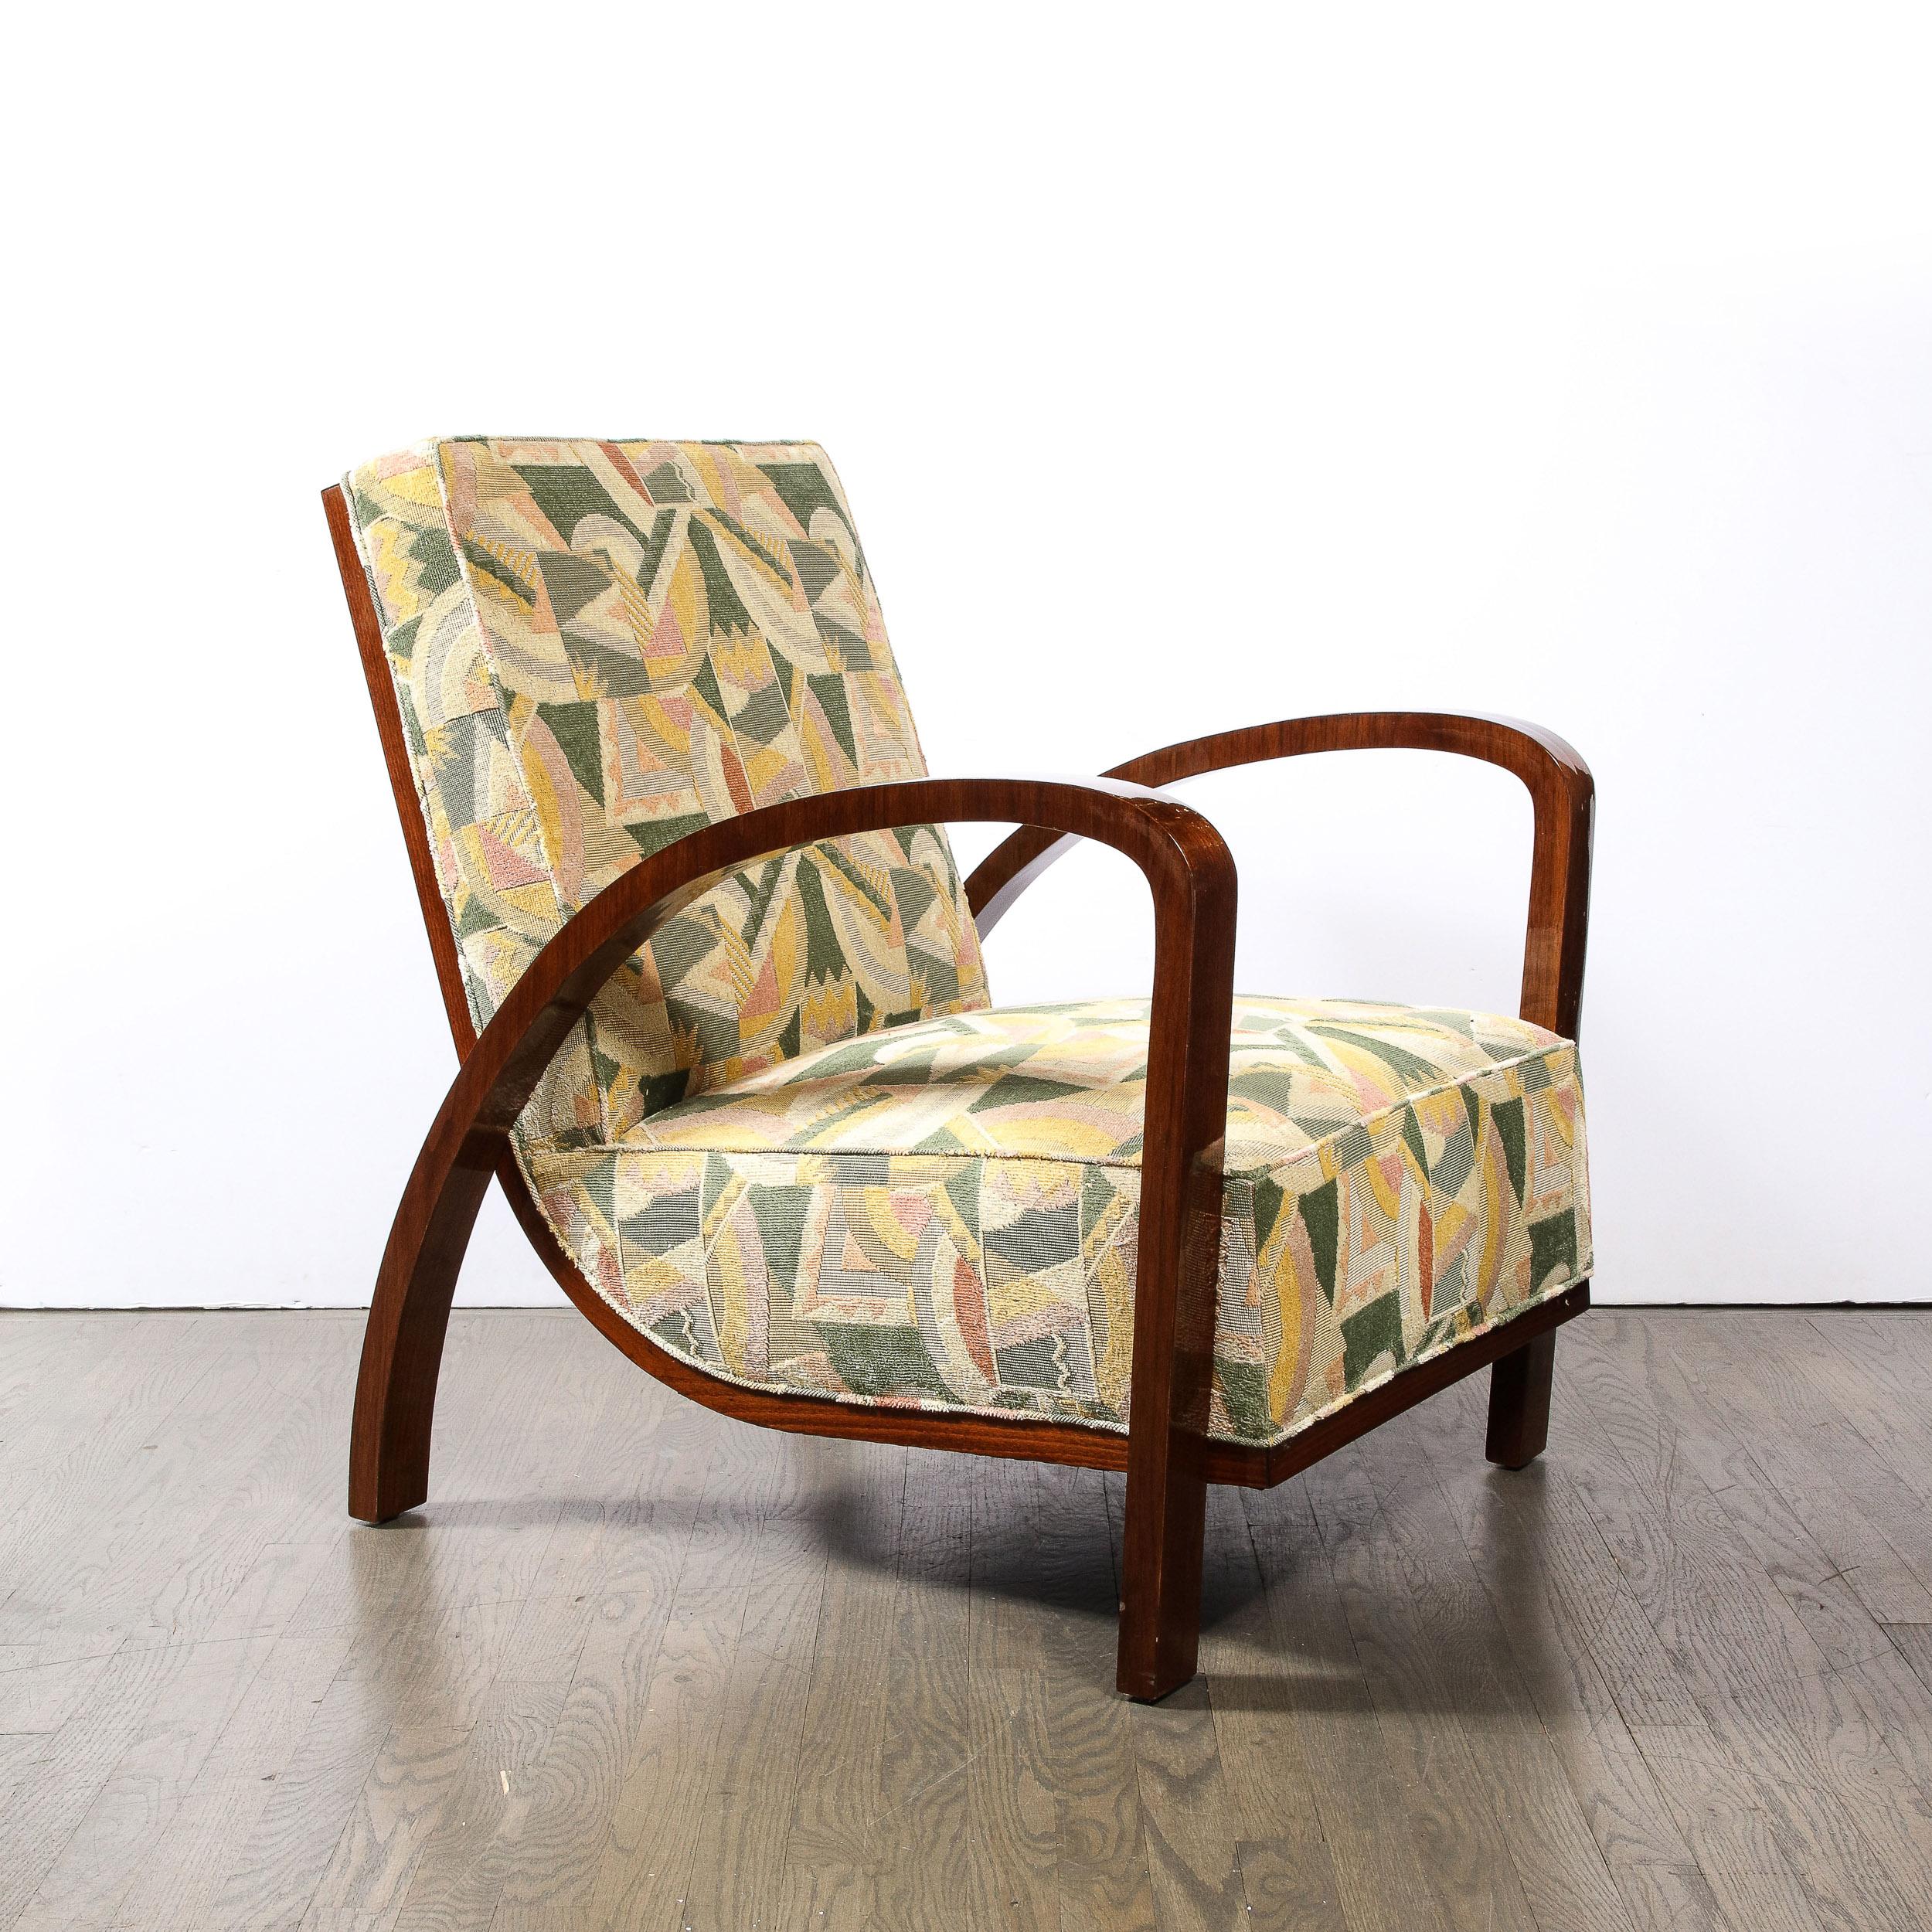 Pair of Art Deco Halabala Arm Chairs in Walnut & Rare Clarence House Fabric For Sale 7